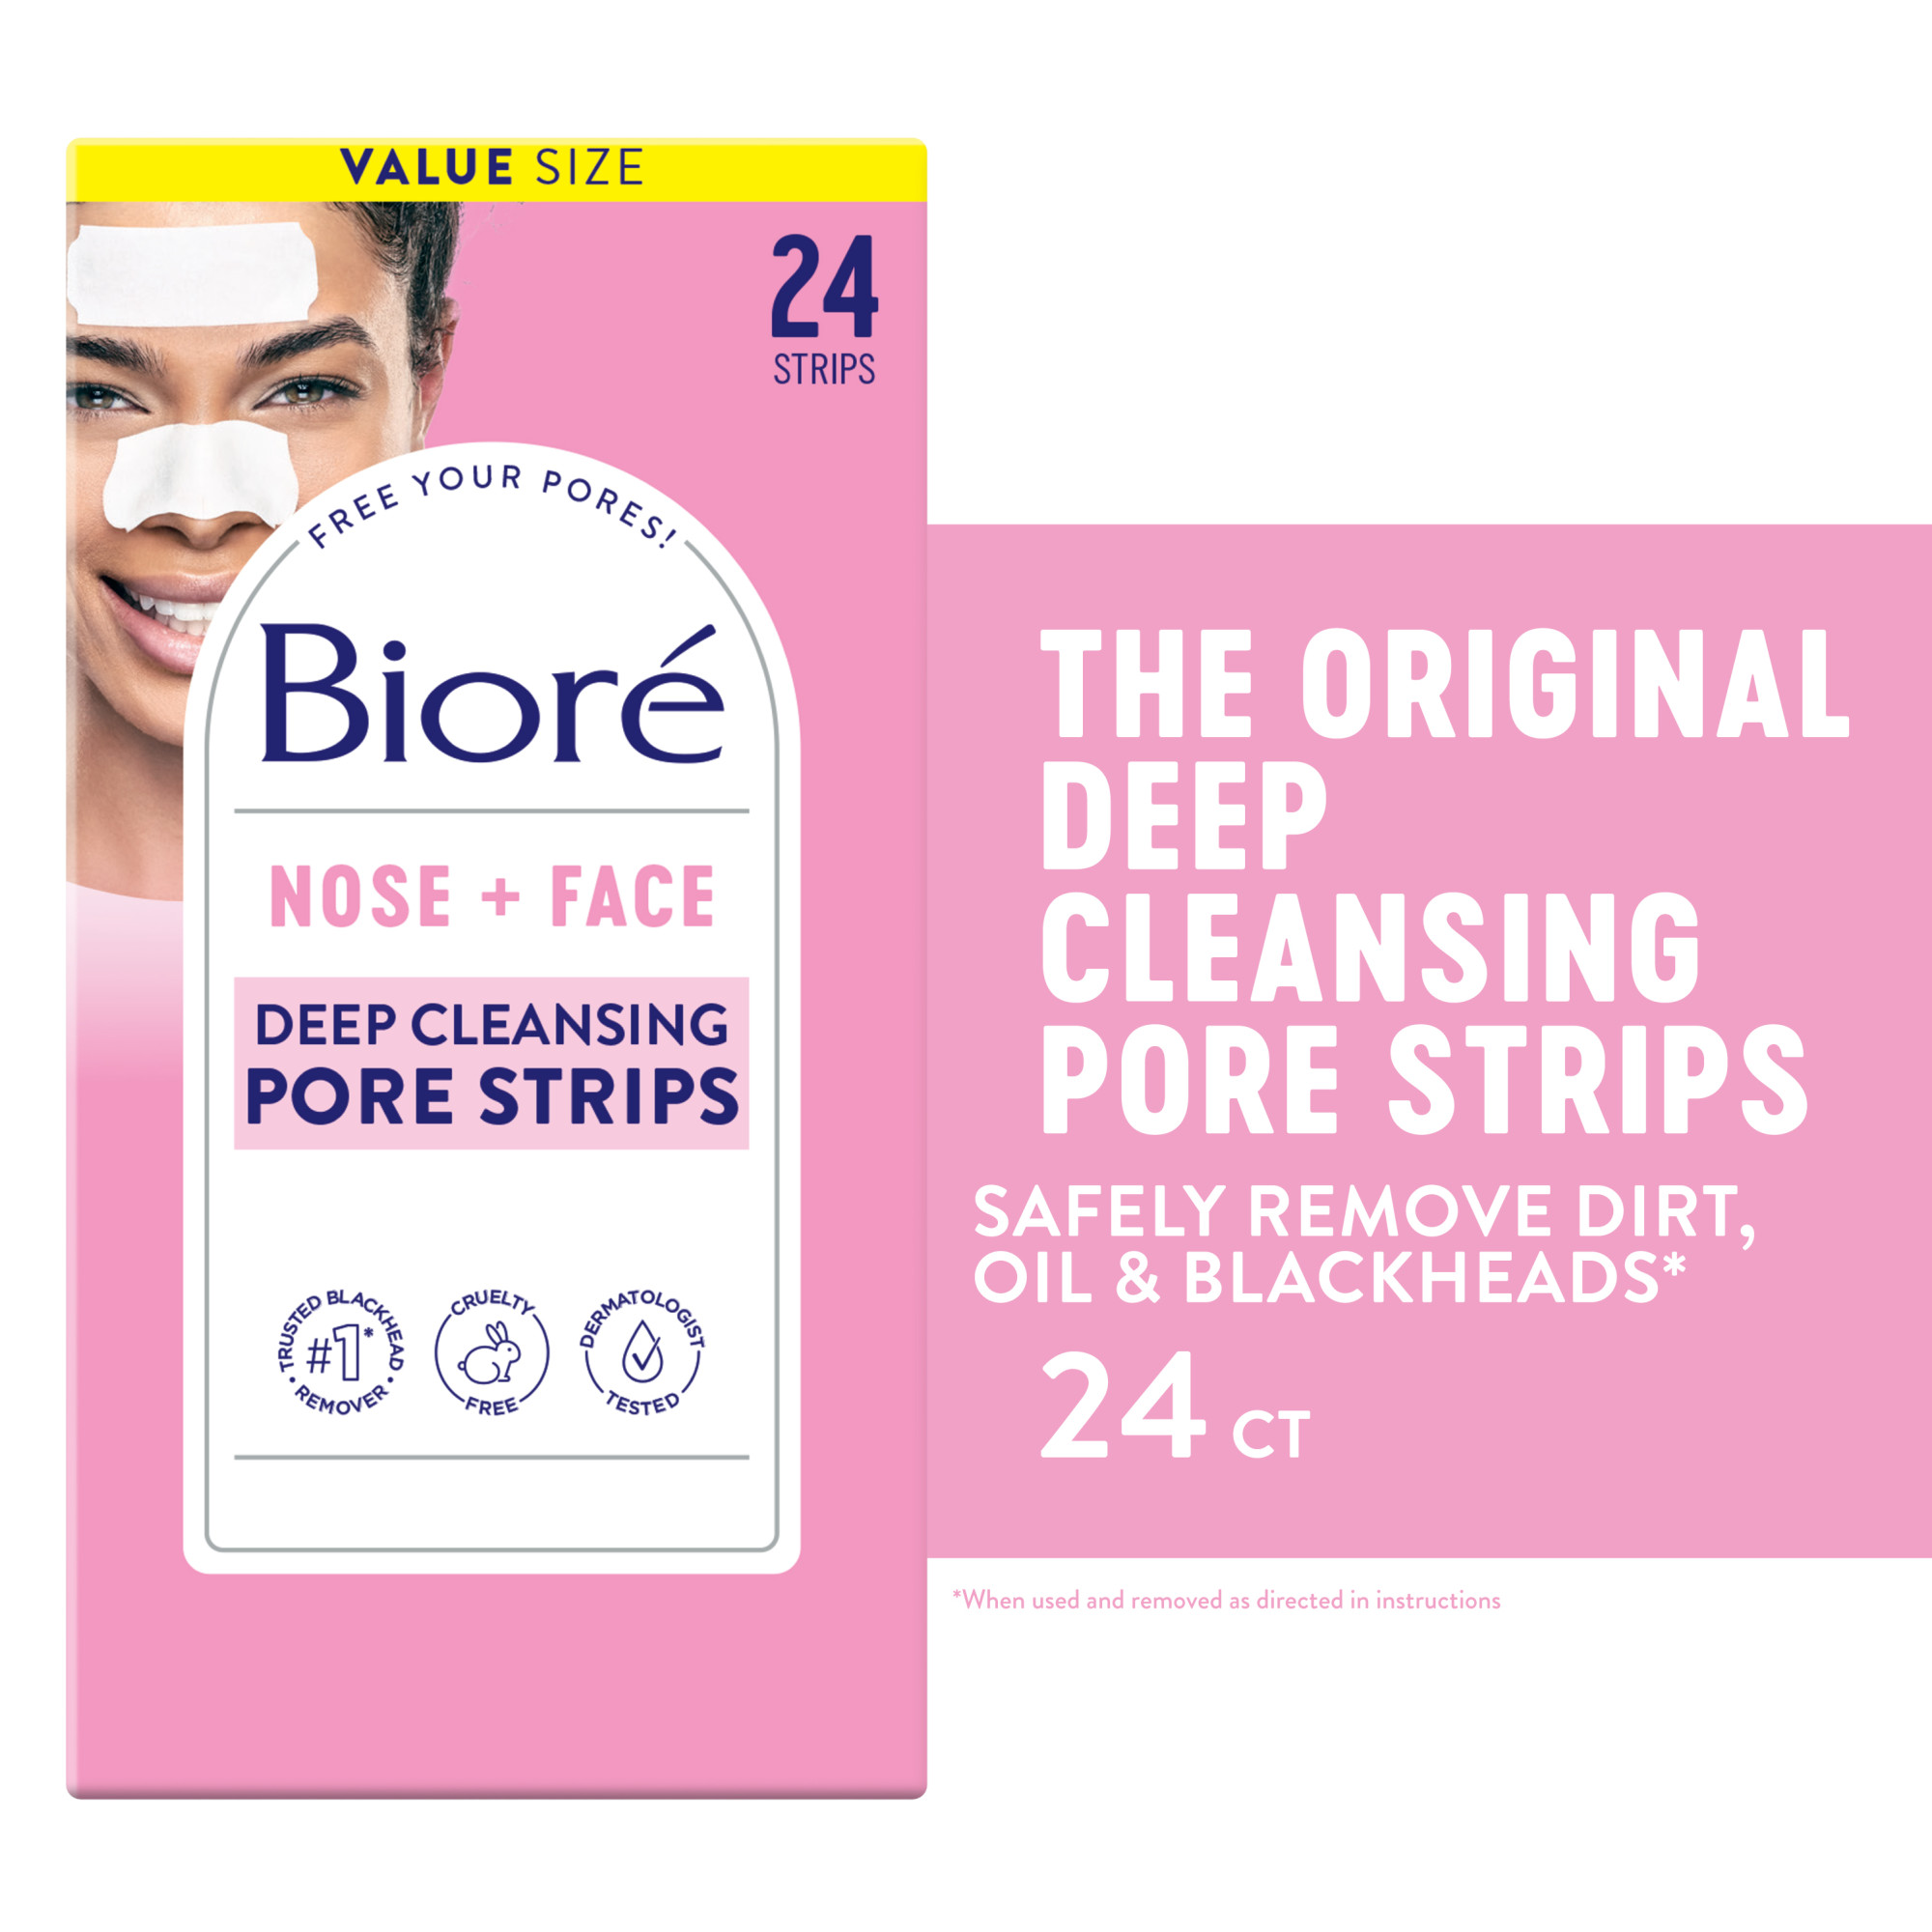 Biore Original Nose+Face Deep Cleansing Blackhead Remover Pore Strips, 12 Nose + 12 Face Strips, 24 ct - image 1 of 11